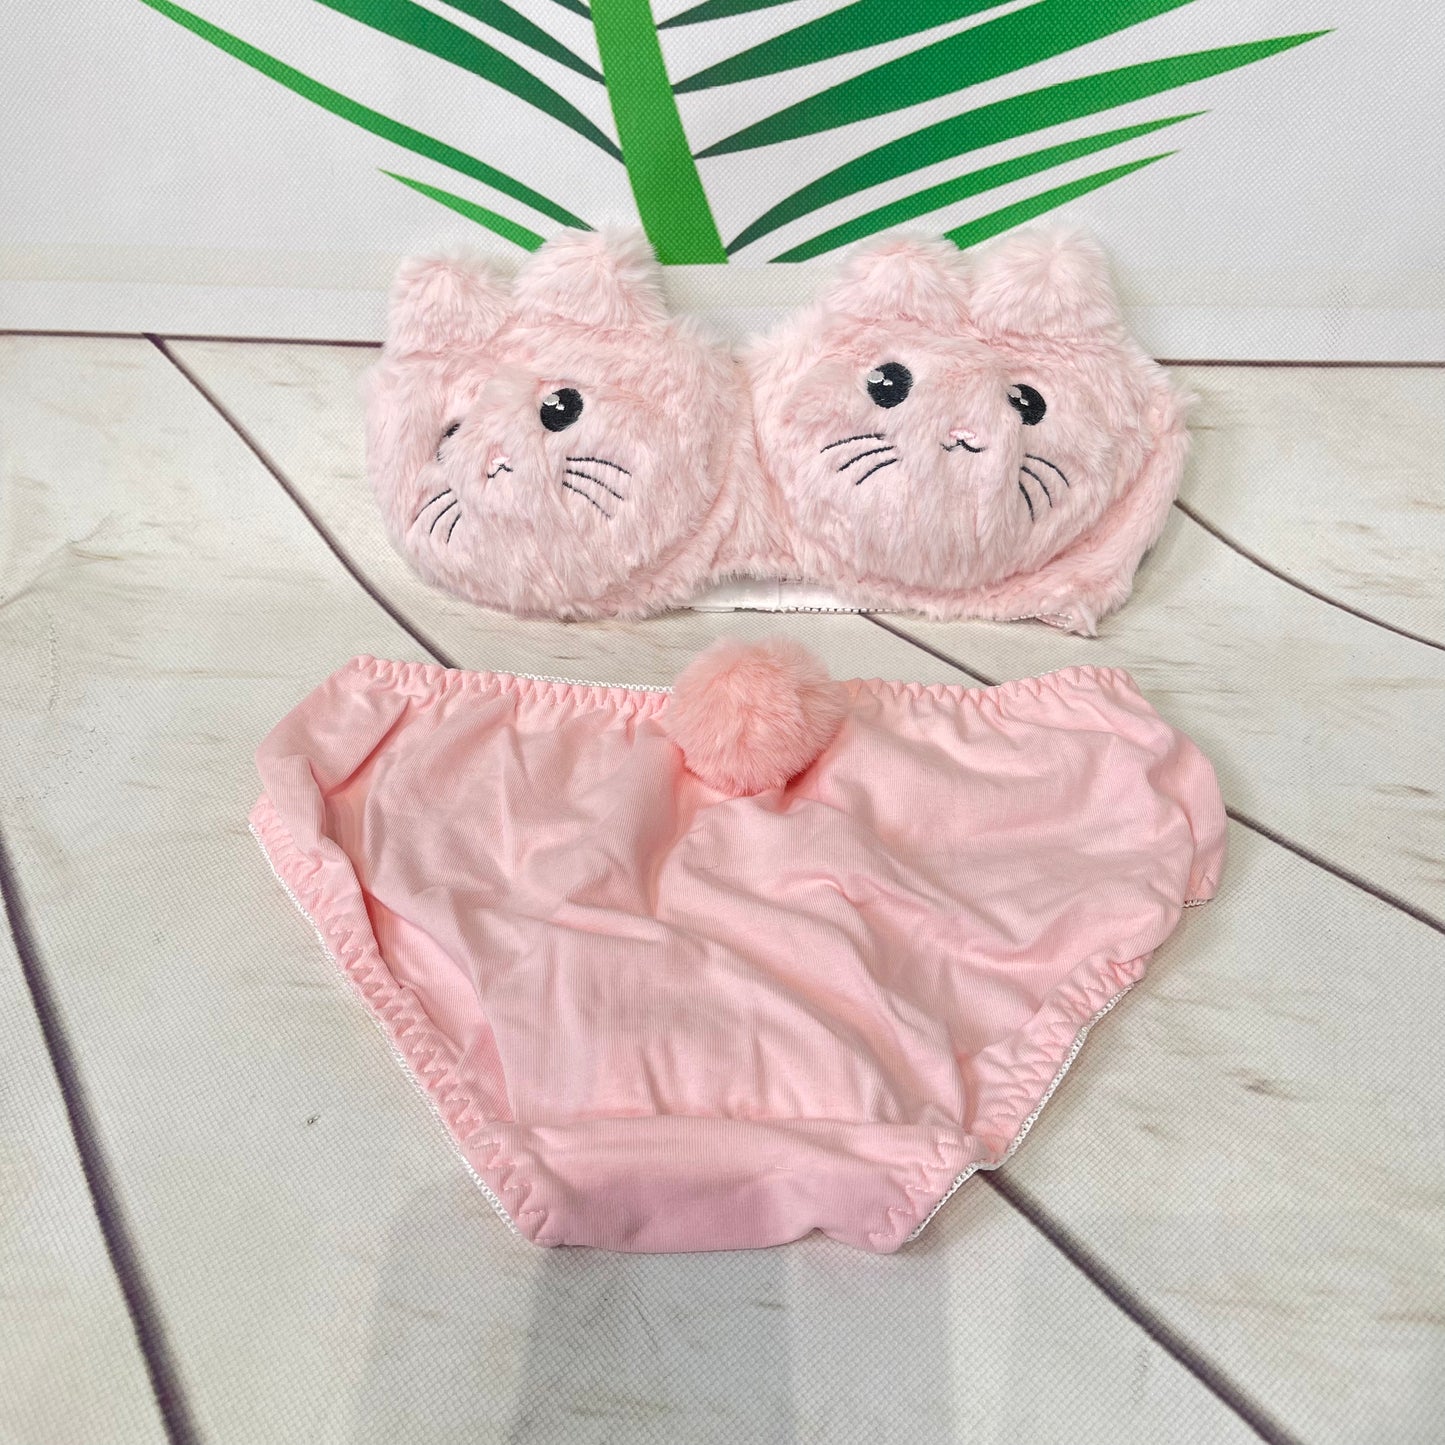 Aleeby, #aleeby #ootd #ootdfashion 🐰🐰 Cute cat pink plush underwear. So  cute and soft. Search:BY70146 Use code 'aleeby' for 10% off Cli